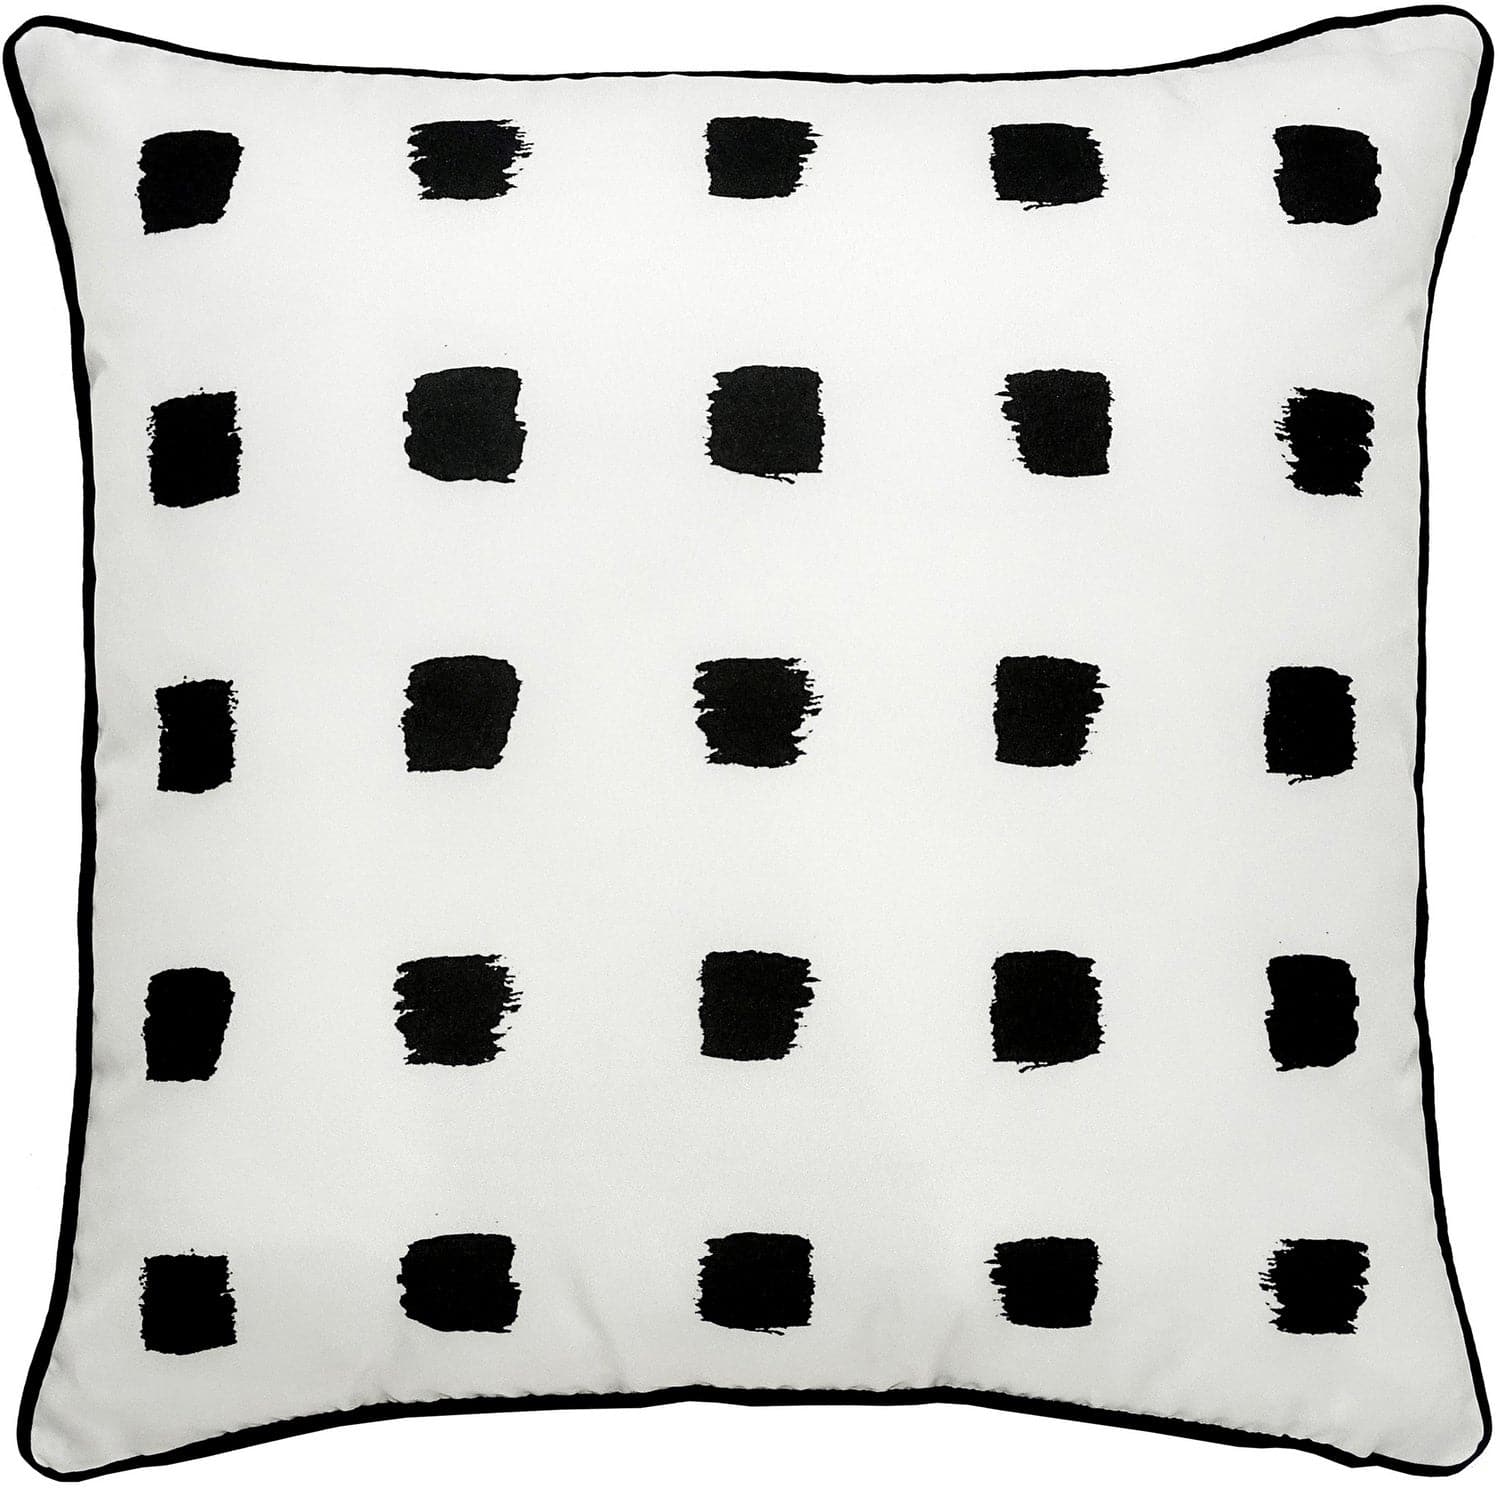 Renwil - PWFLO1006 - Home Accents - Rugs/Pillows/Blankets